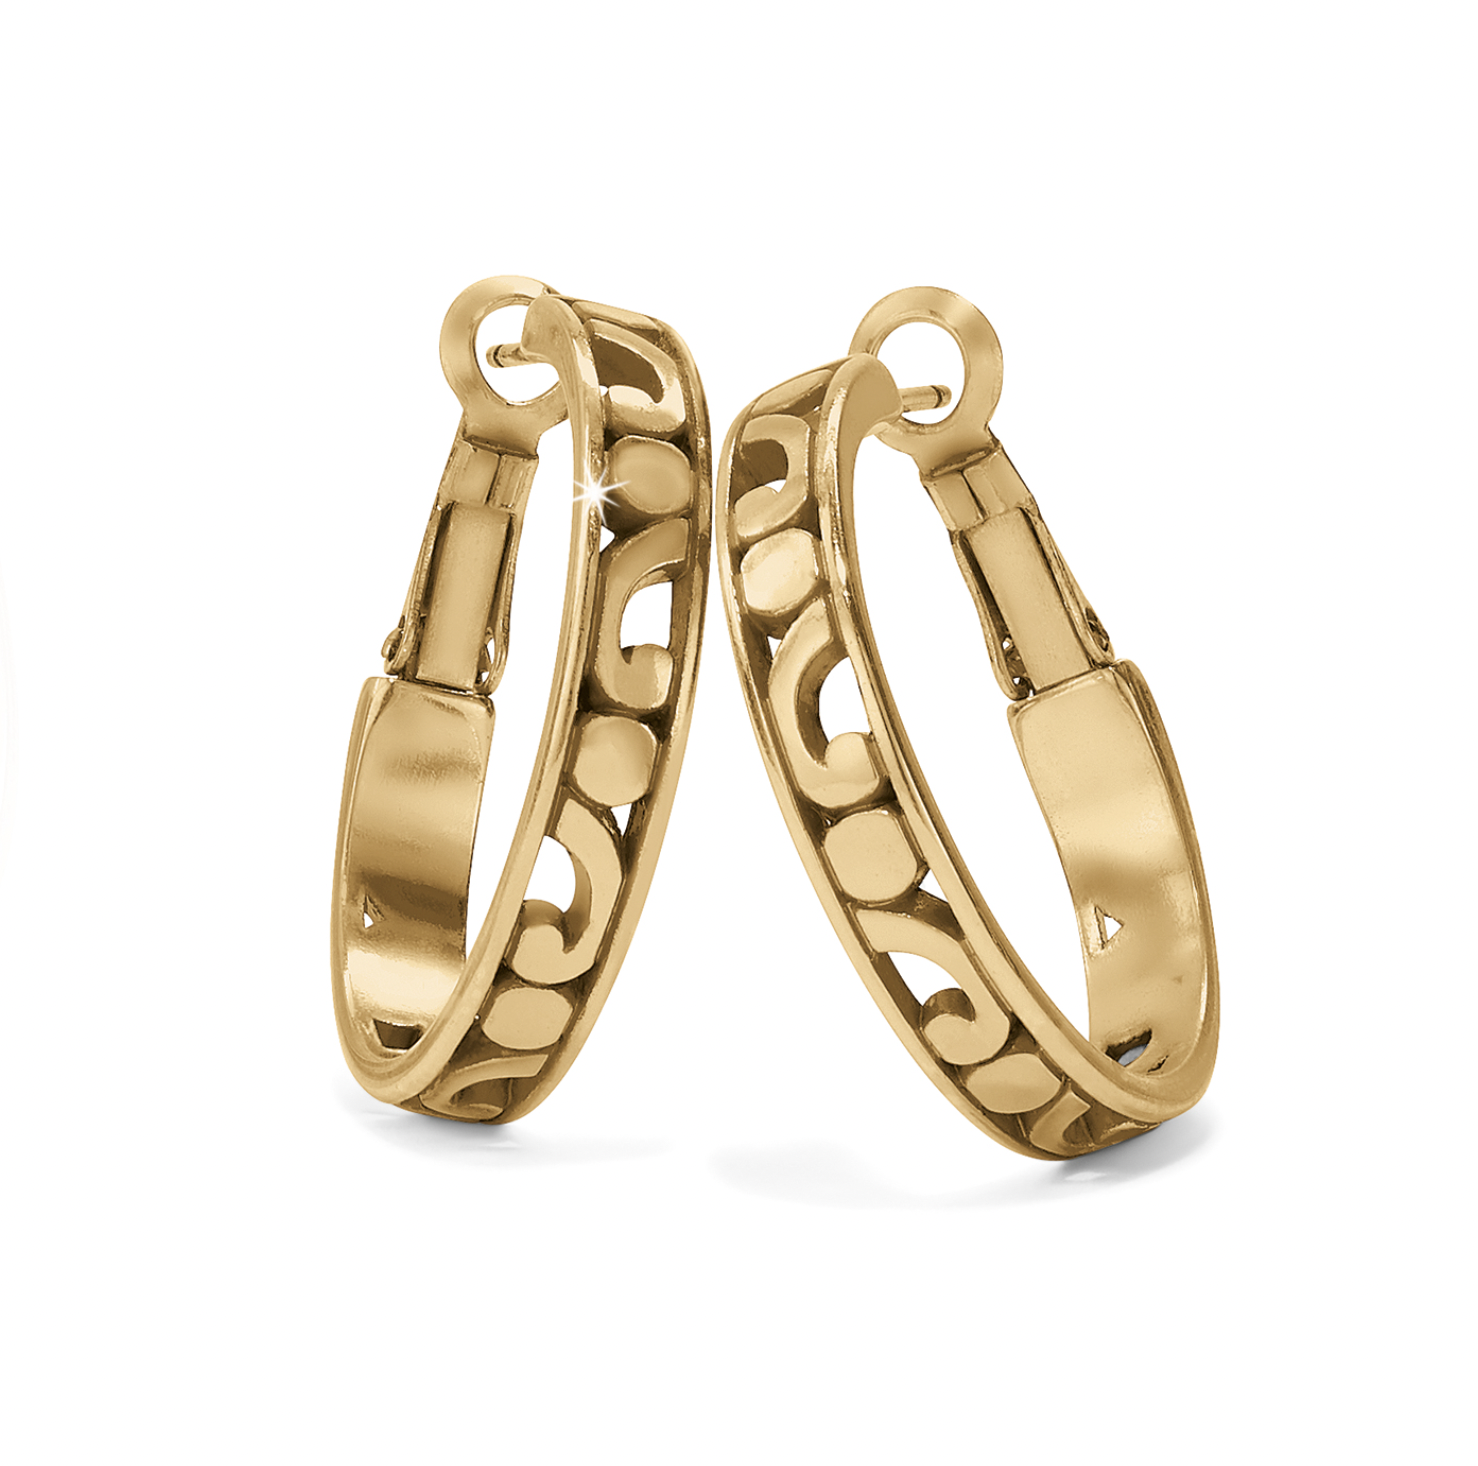 BRIGHTON CONTEMPO GOLD SMALL HOOP EARRINGS